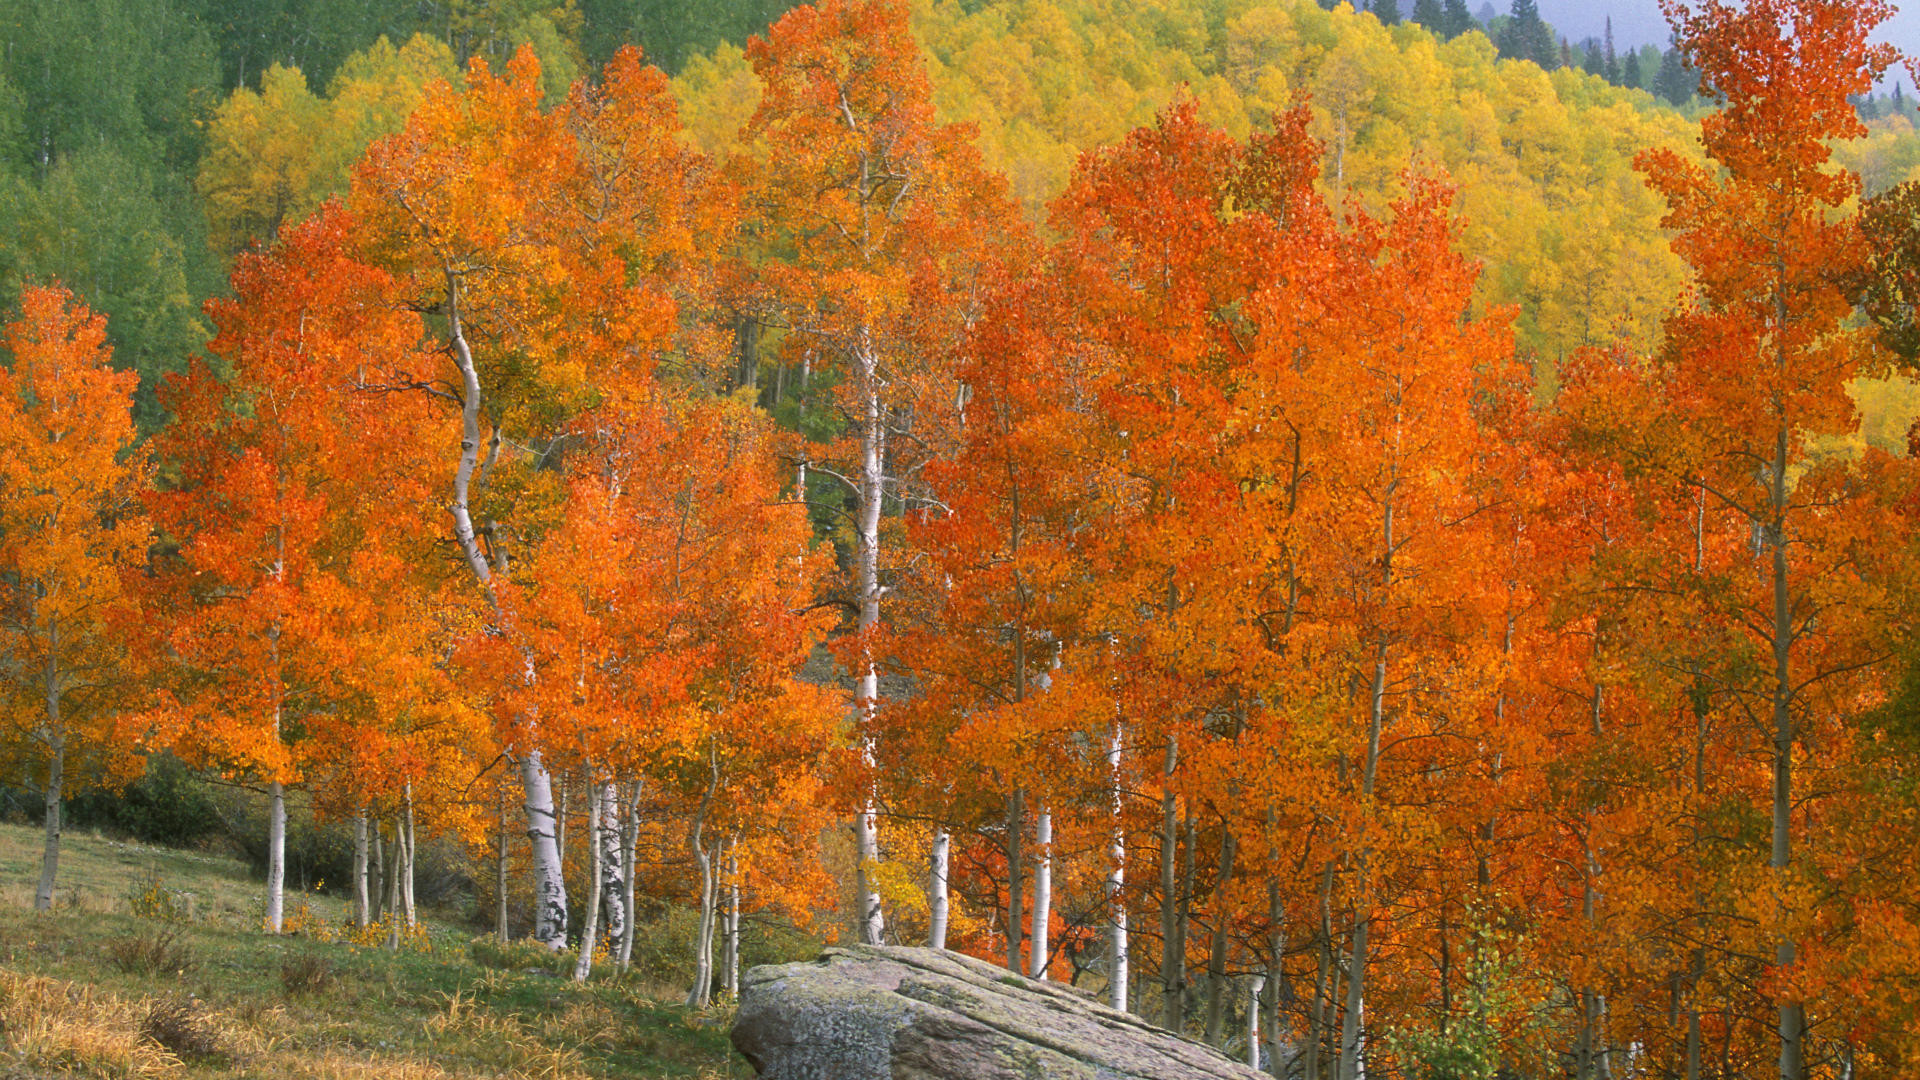 1920x1080 Download Background - Fall Aspens, Owl Creek Pass, Colorado - Free Cool  Backgrounds and Wallpapers for your Desktop Or Laptop.